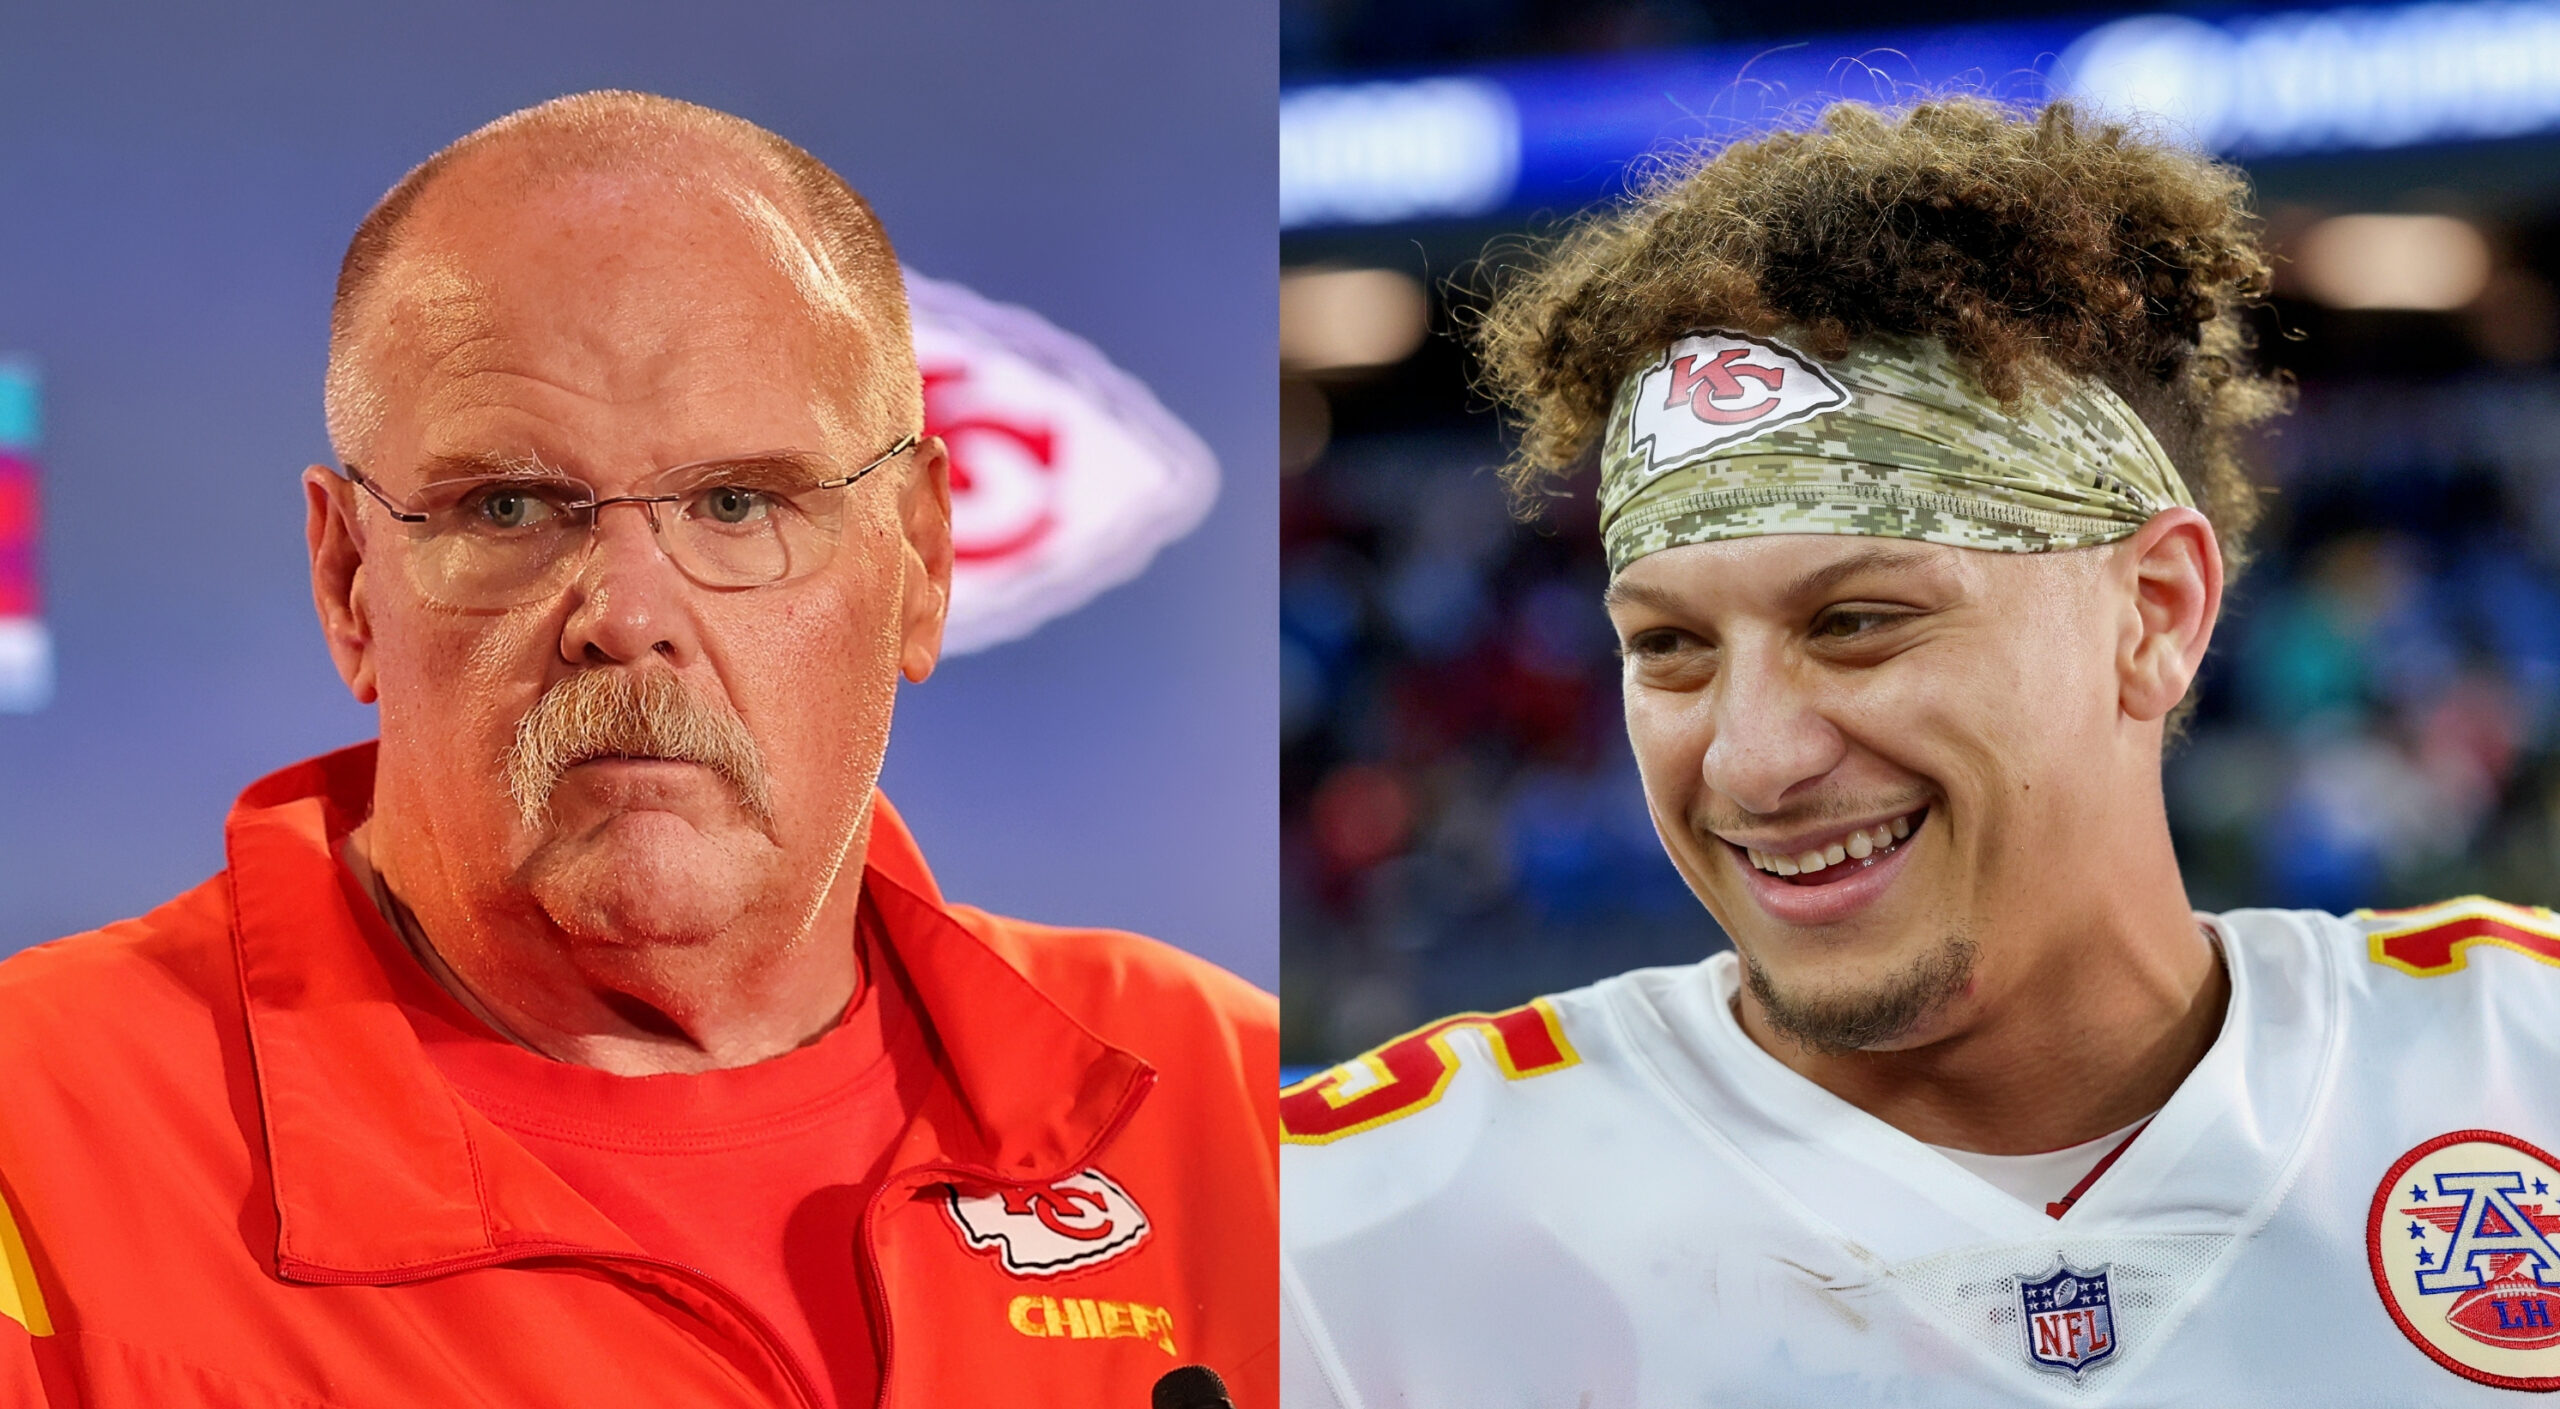 Patrick Mahomes Attempted To Pull A Prank On Andy Reid